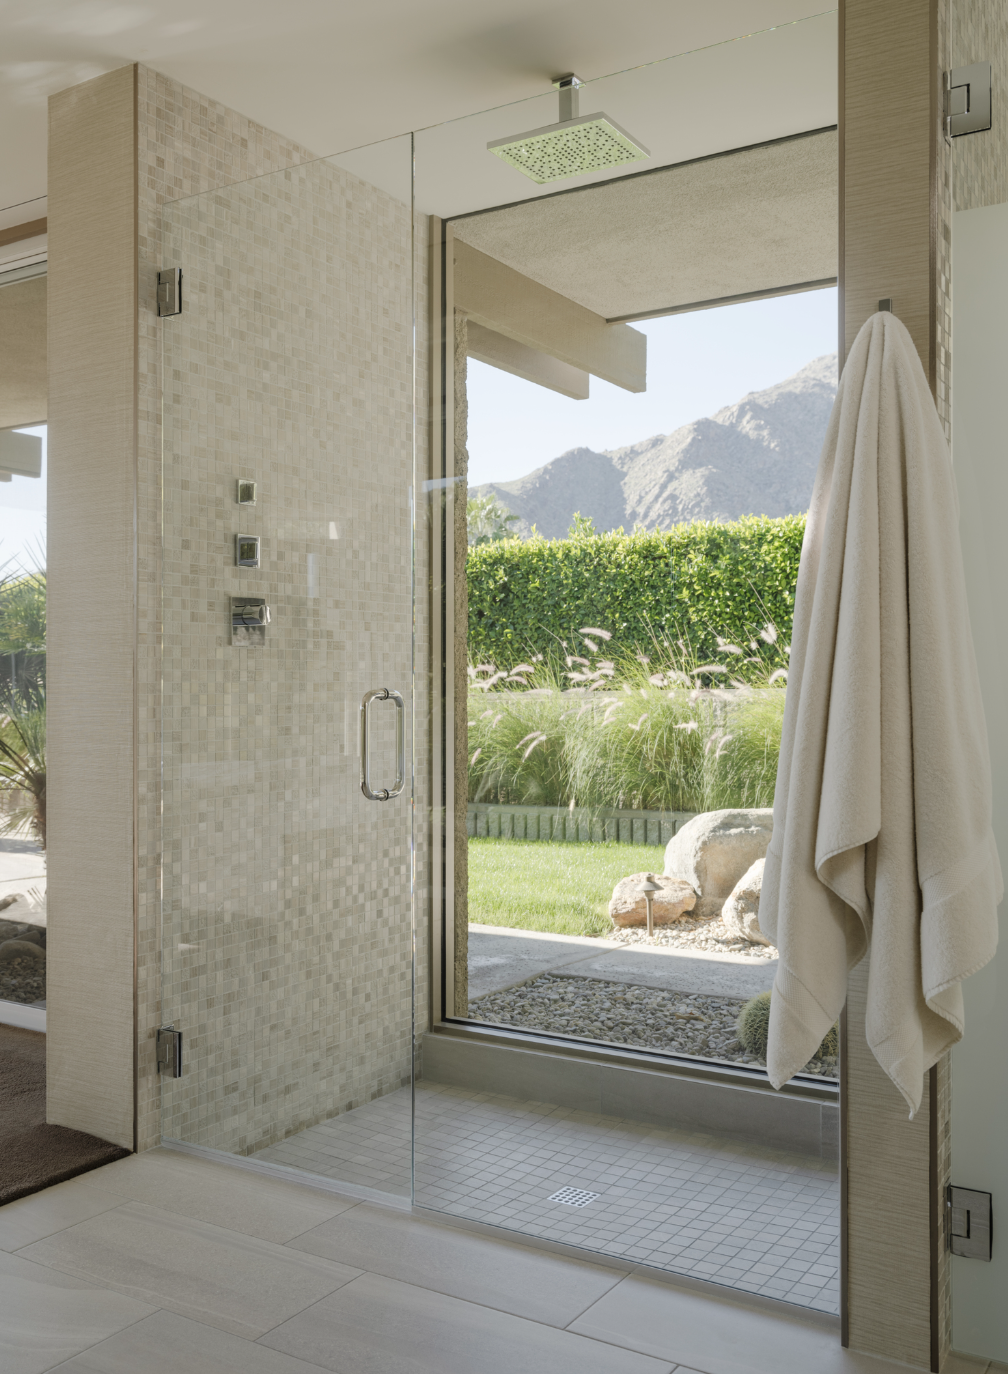 https://hips.hearstapps.com/hmg-prod/images/walk-in-shower-ideas-stunning-views-6439c1267c6a7.png